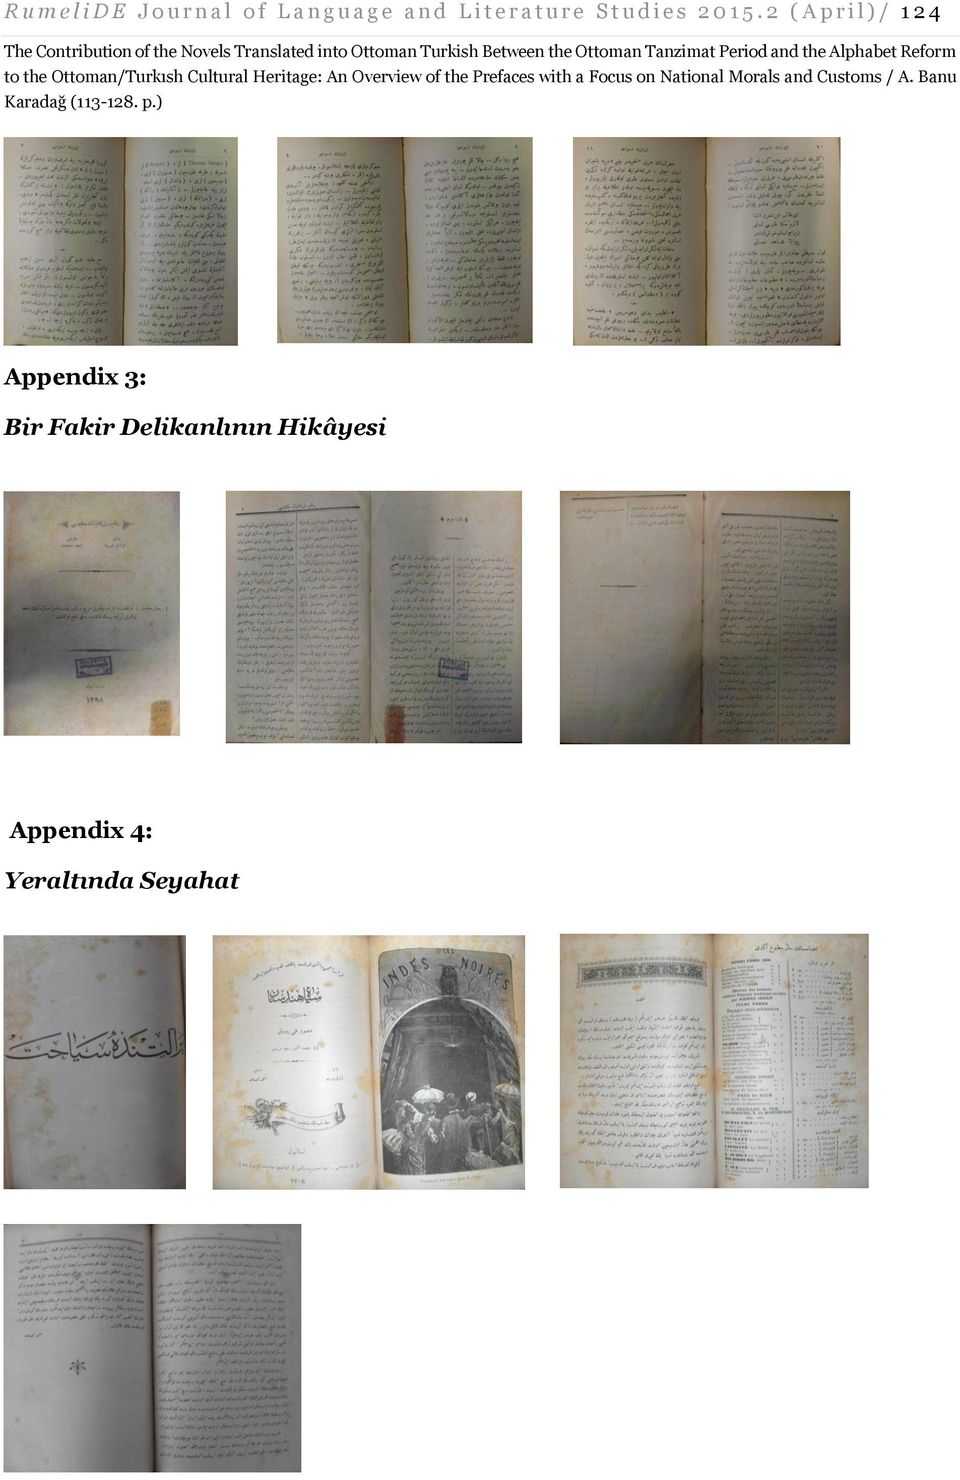 Period and the Alphabet Reform to the Ottoman/Turkısh Cultural Heritage: An Overview of the Prefaces with a Focus on